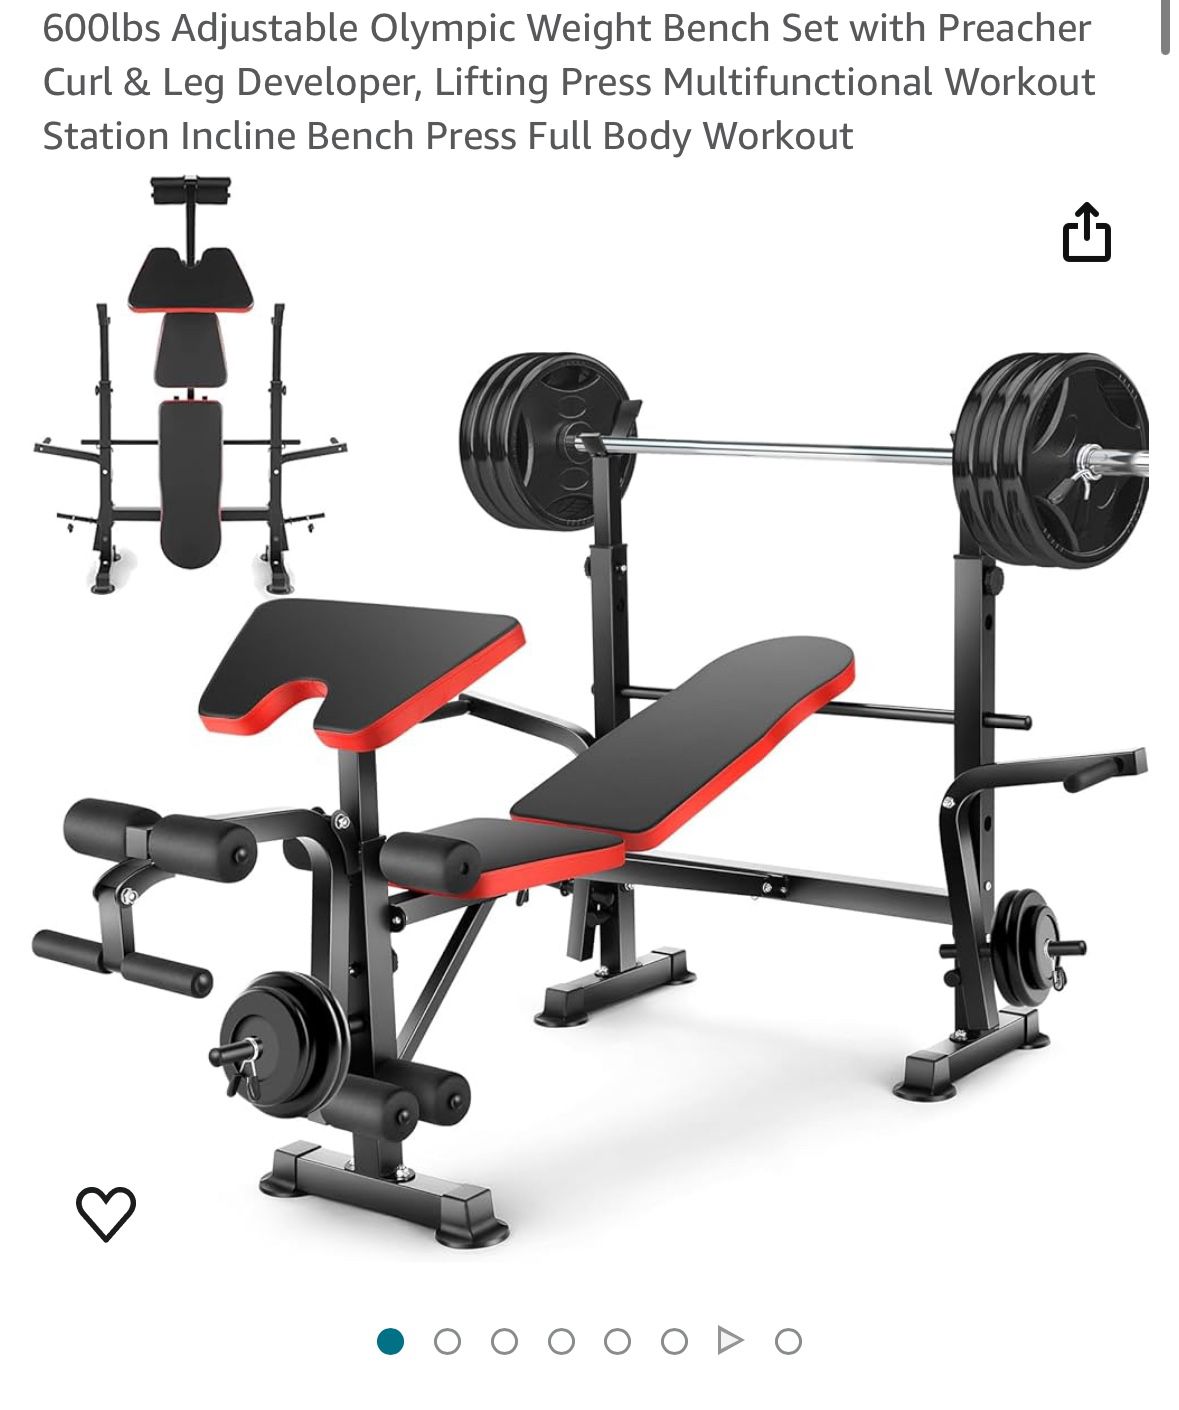 Adjustable Olympic Bench Set With Curl & Leg Developer (WEIGHTS NOT INCLUDED)